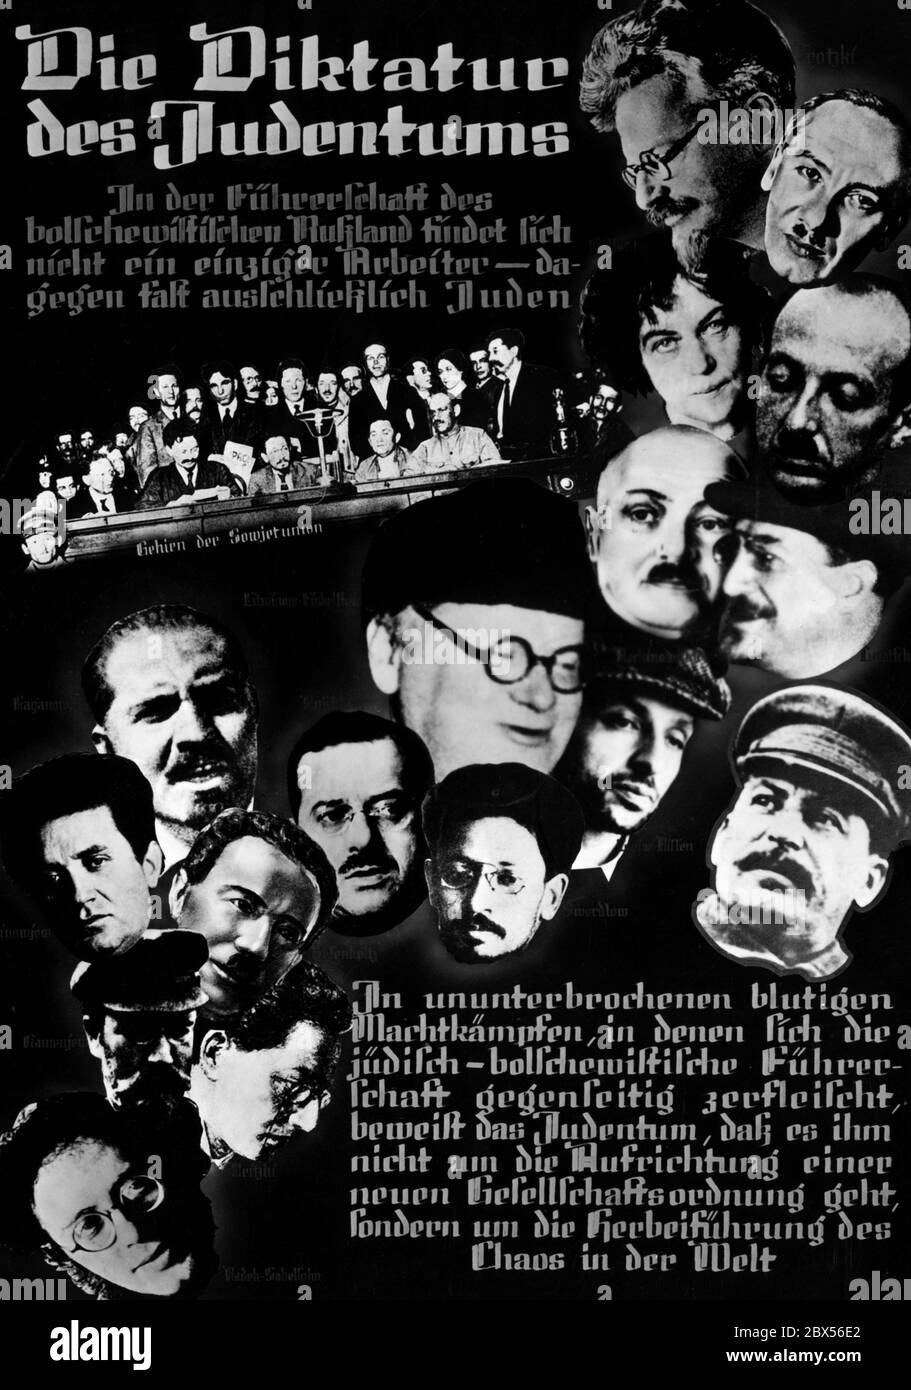 Display board of the anti-Bolshevik exhibition 'Bolschewismus ohne Maske' (Bolshevism without Mask) in the Reichstag building in Berlin explains 'The Dictatorship of Judaism' in a propagandistic way. Stock Photo